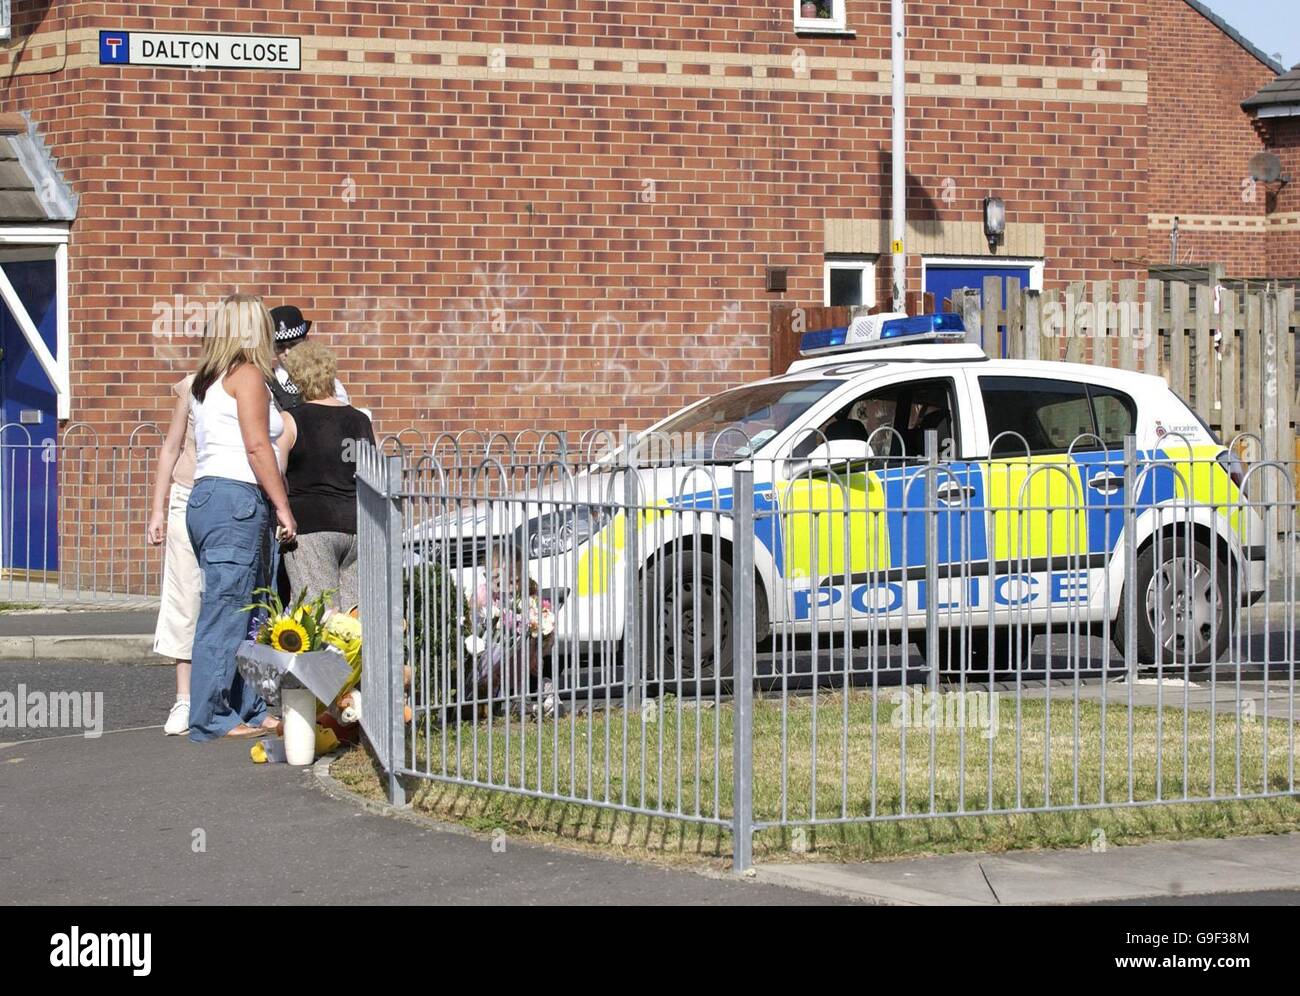 Police and passers-by at the junction of Dalton Close and Billinge Street in Blackburn, Lancashire, where a six-year-old girl was killed in a hit-and-run accident Thursday evening while playing in the street. Stock Photo